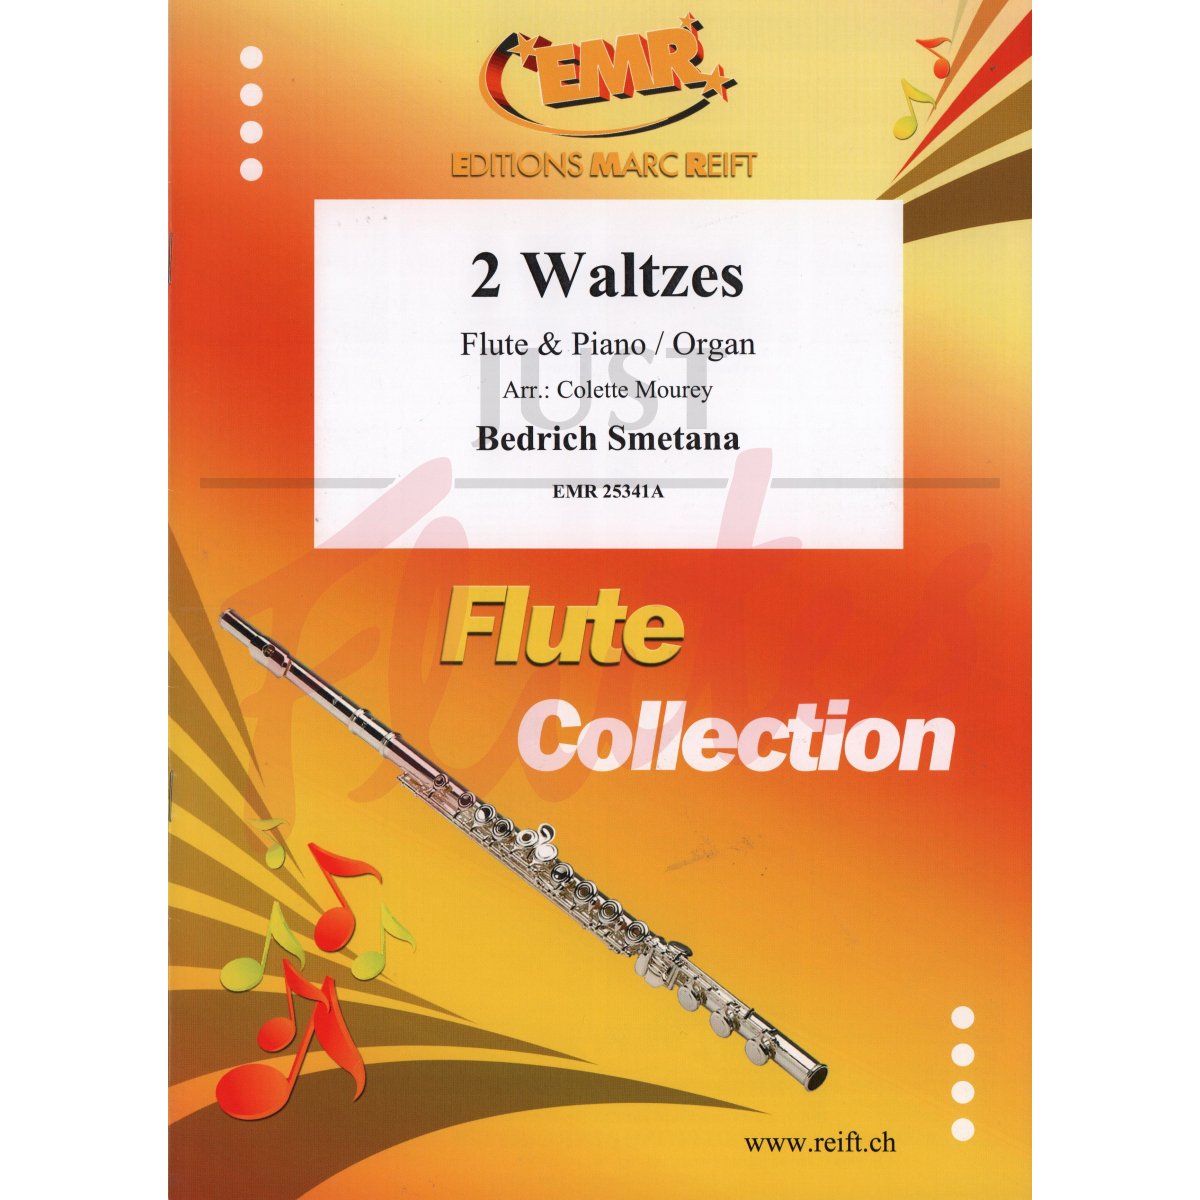 2 Waltzes for Flute and Piano or Organ